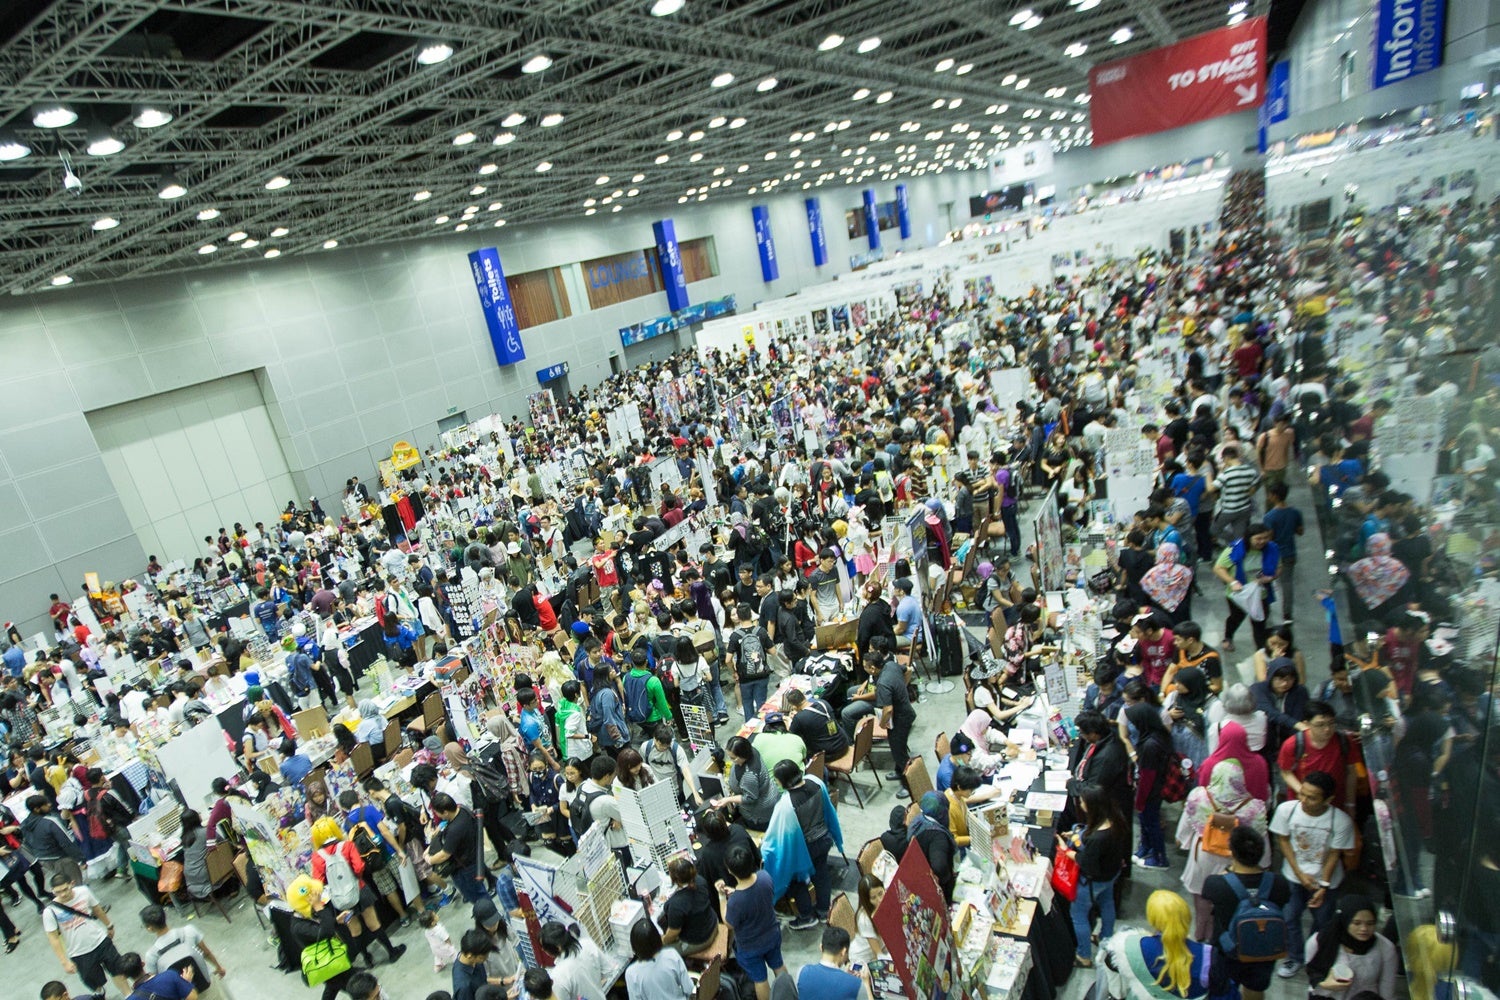 Calling All Otakus, Comic Fiesta is Back This 21 & 22 Dec, Here’s How to Get Free Tickets! - WORLD OF BUZZ 1